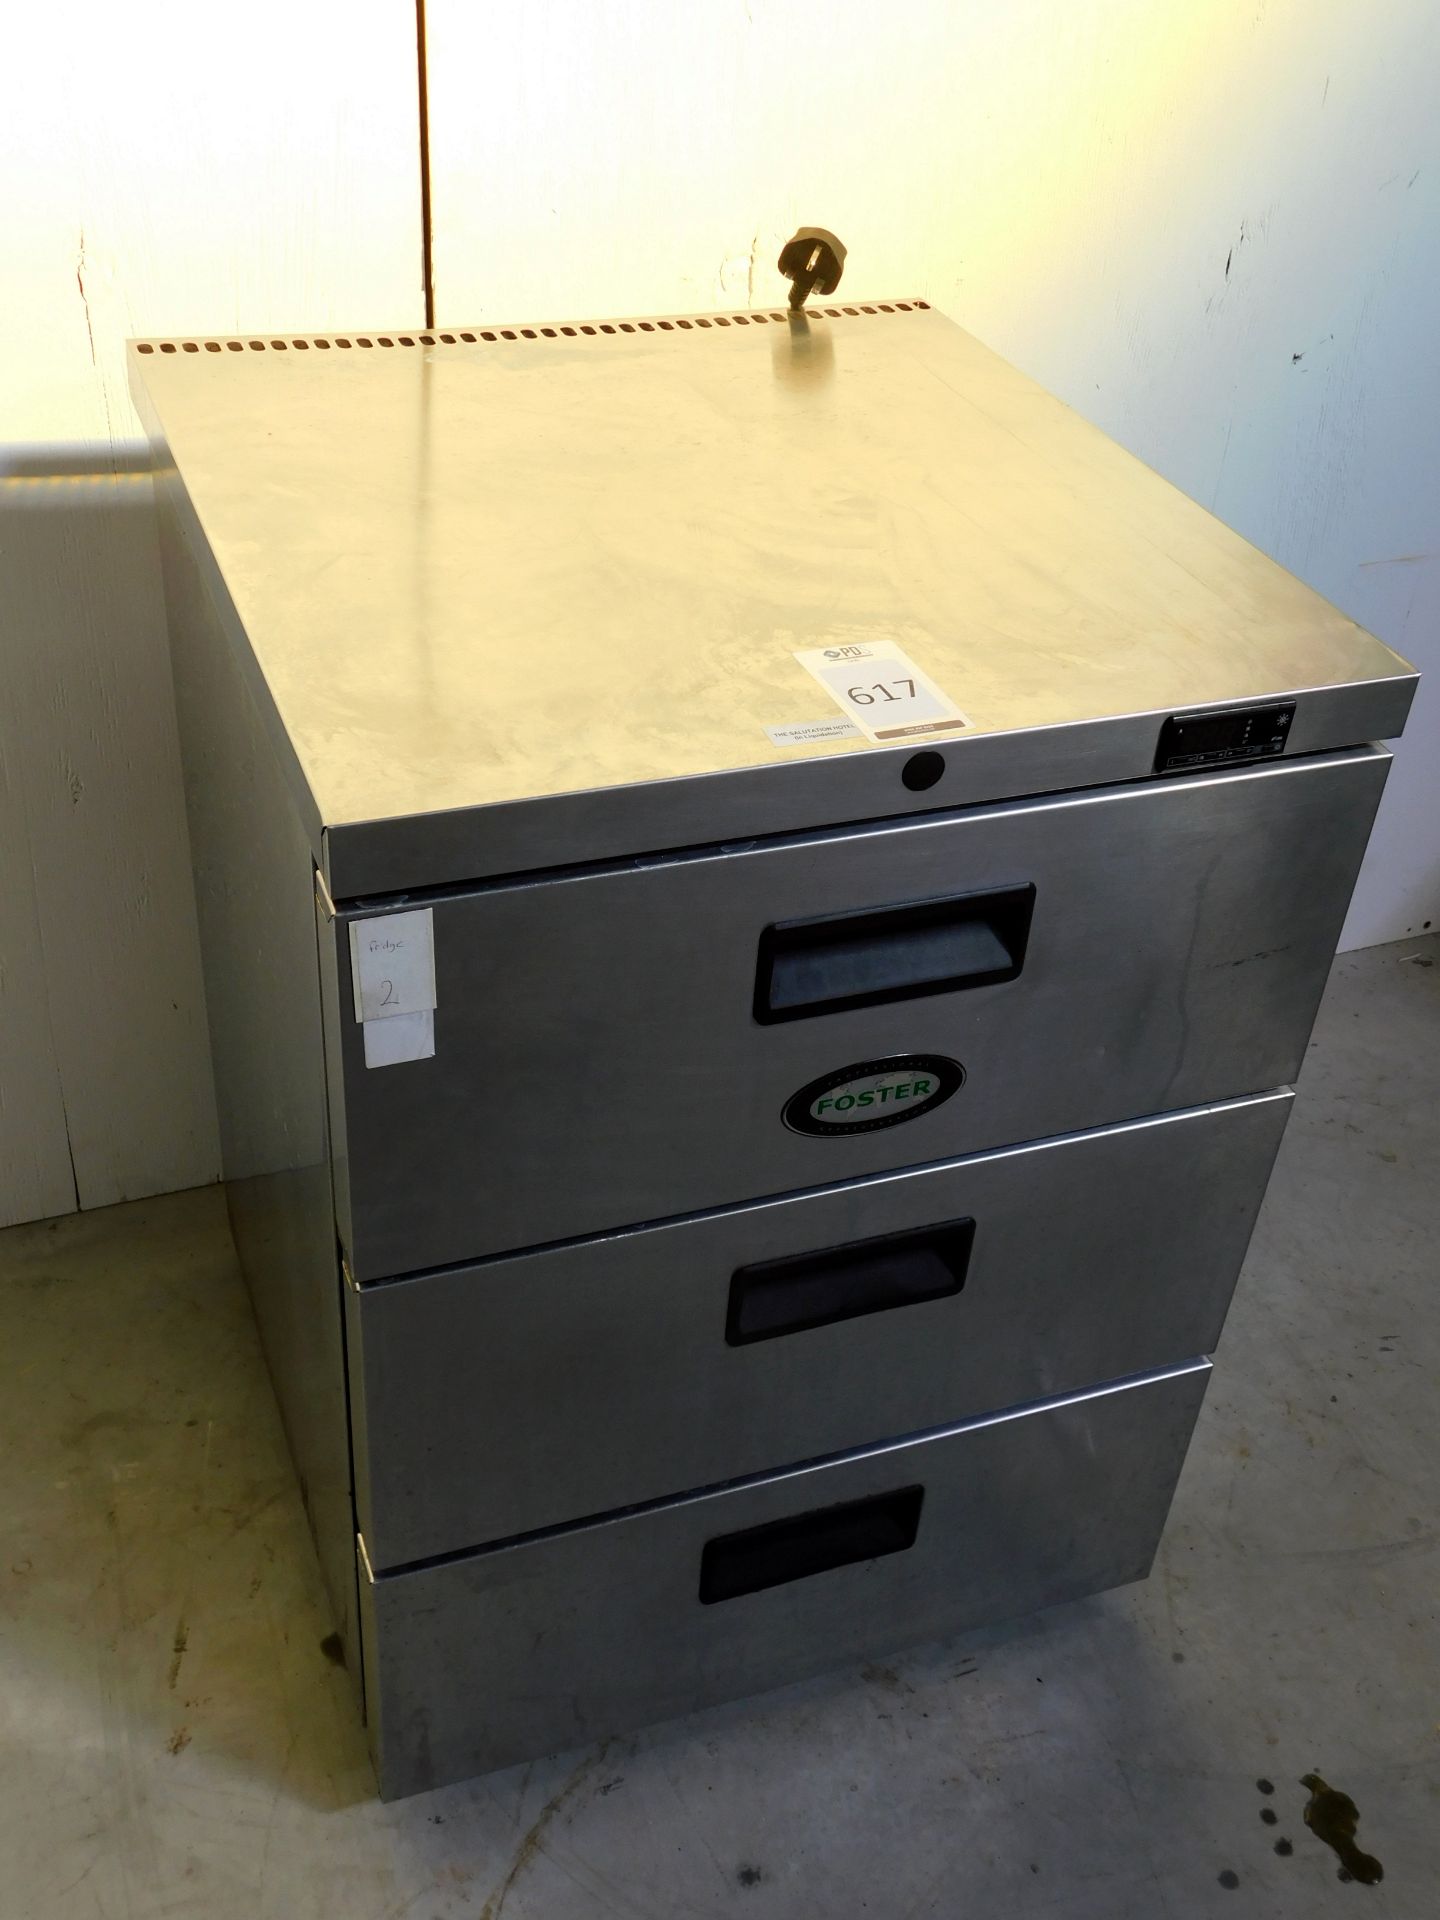 Foster HR150-A Stainless Steel 3-Drawer Refrigerated Undercounter Ingredient Unit, S/N: E5461099 (